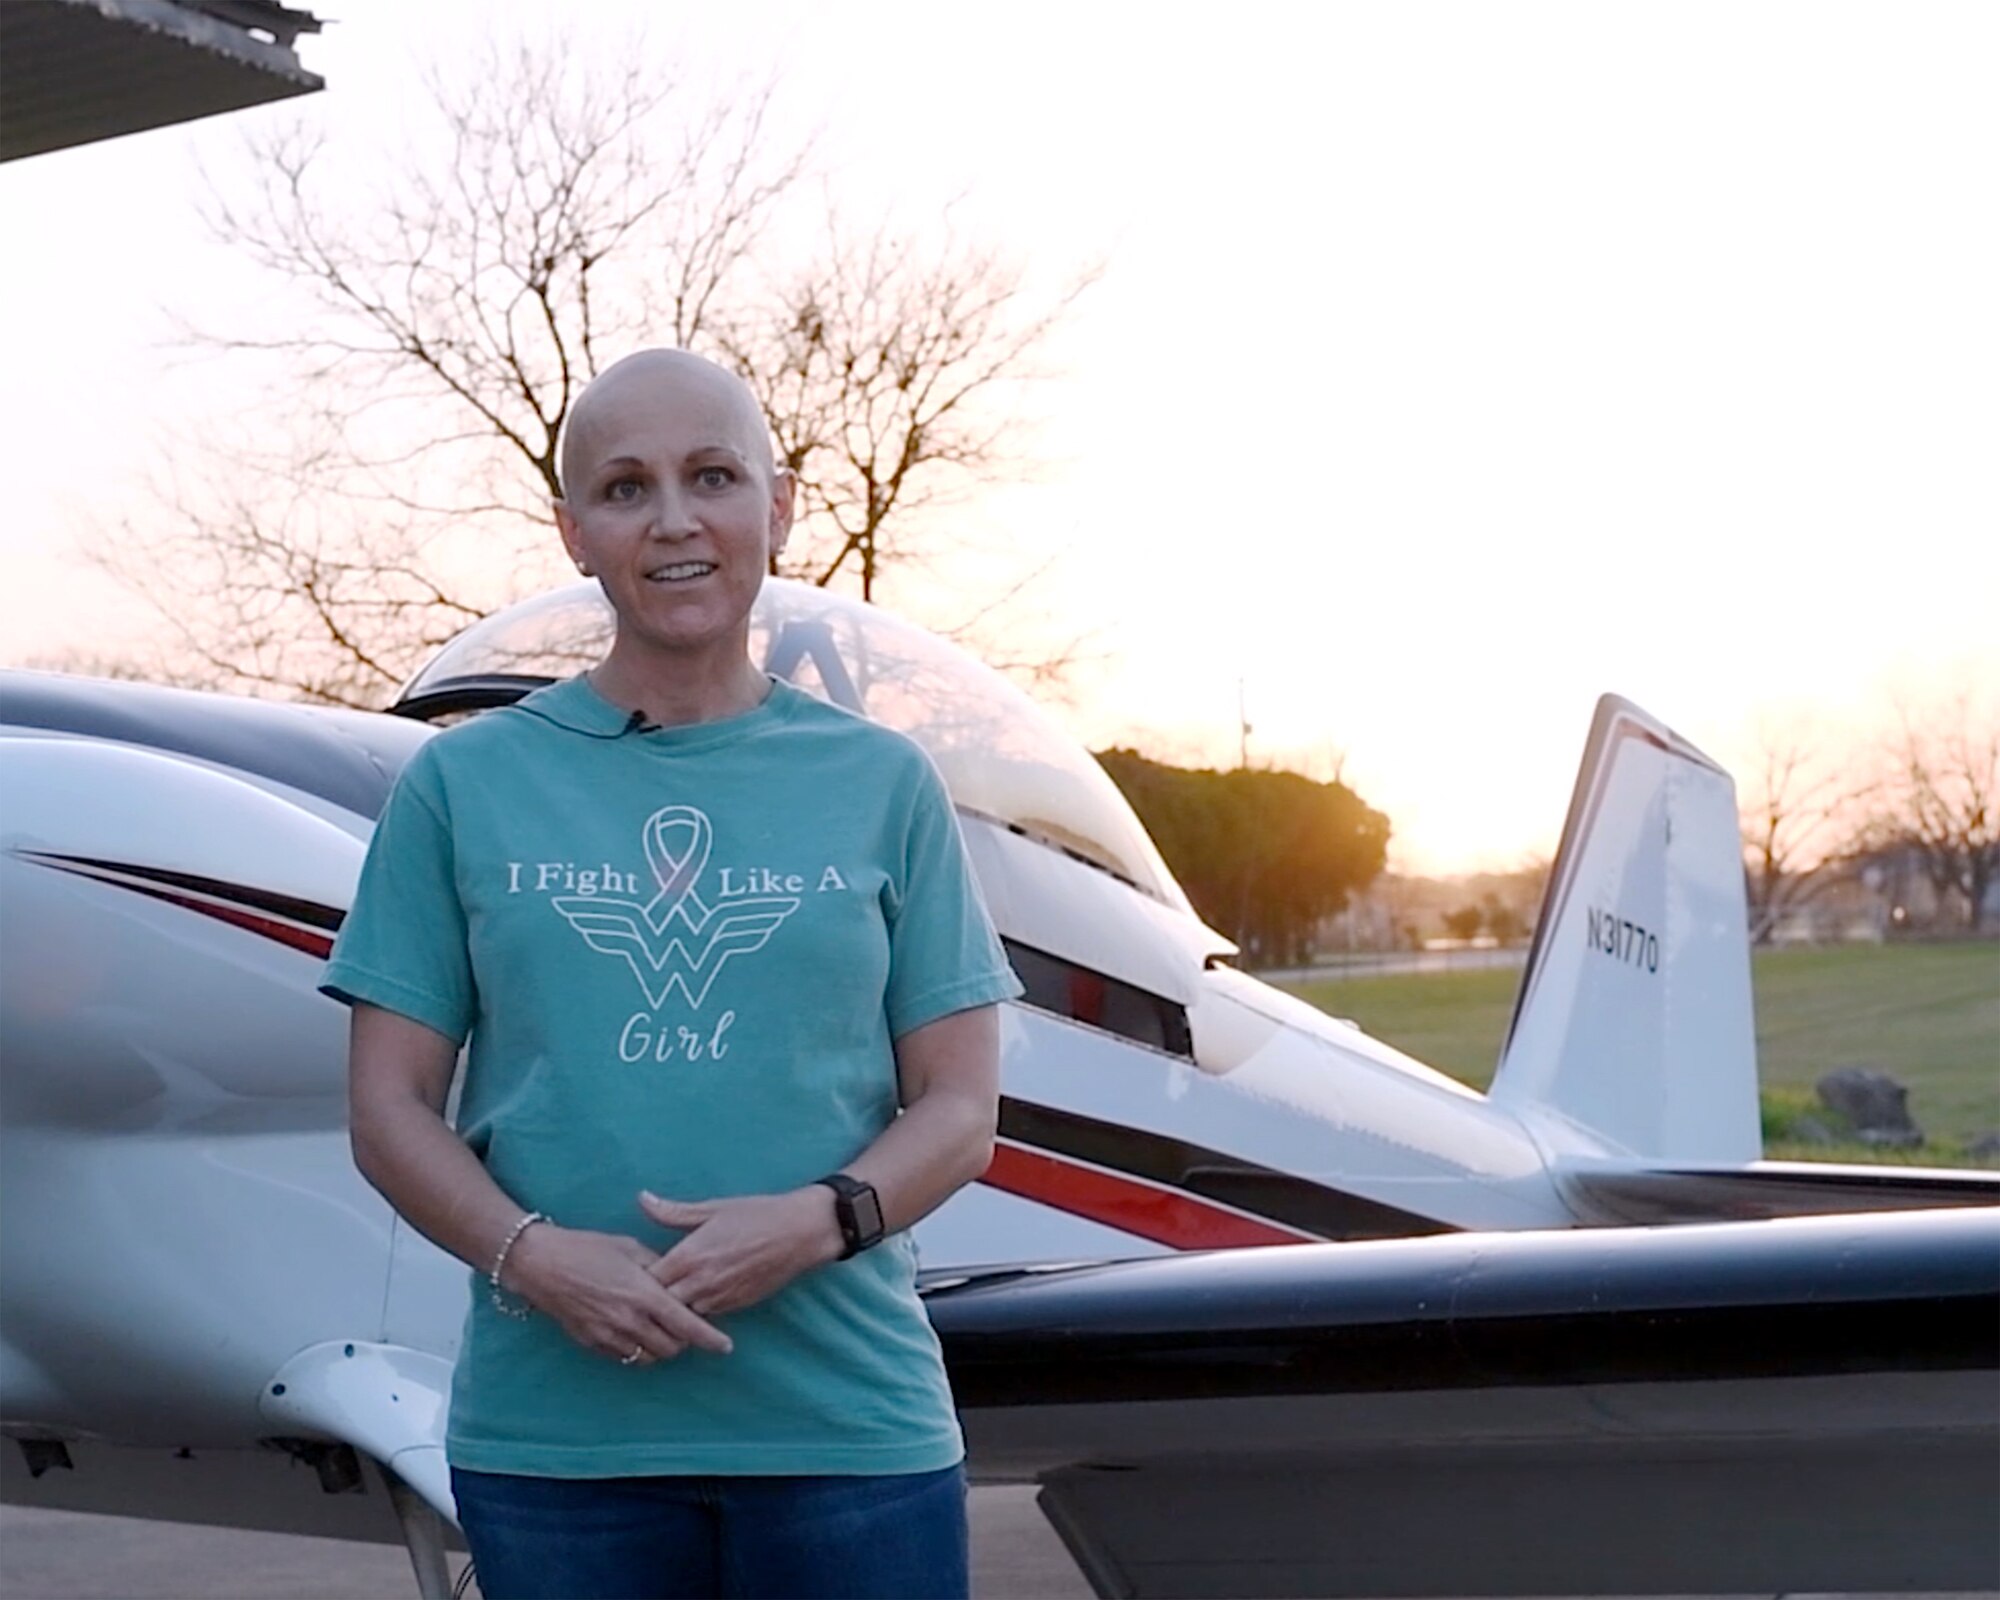 Maj. Cindy Piccirillo, 149th Fighter Wing director of inspections, discusses her fight to win against cancer after returning from an aircraft ride in RV-4 over Bulverde, Texas, March 15, 2021.